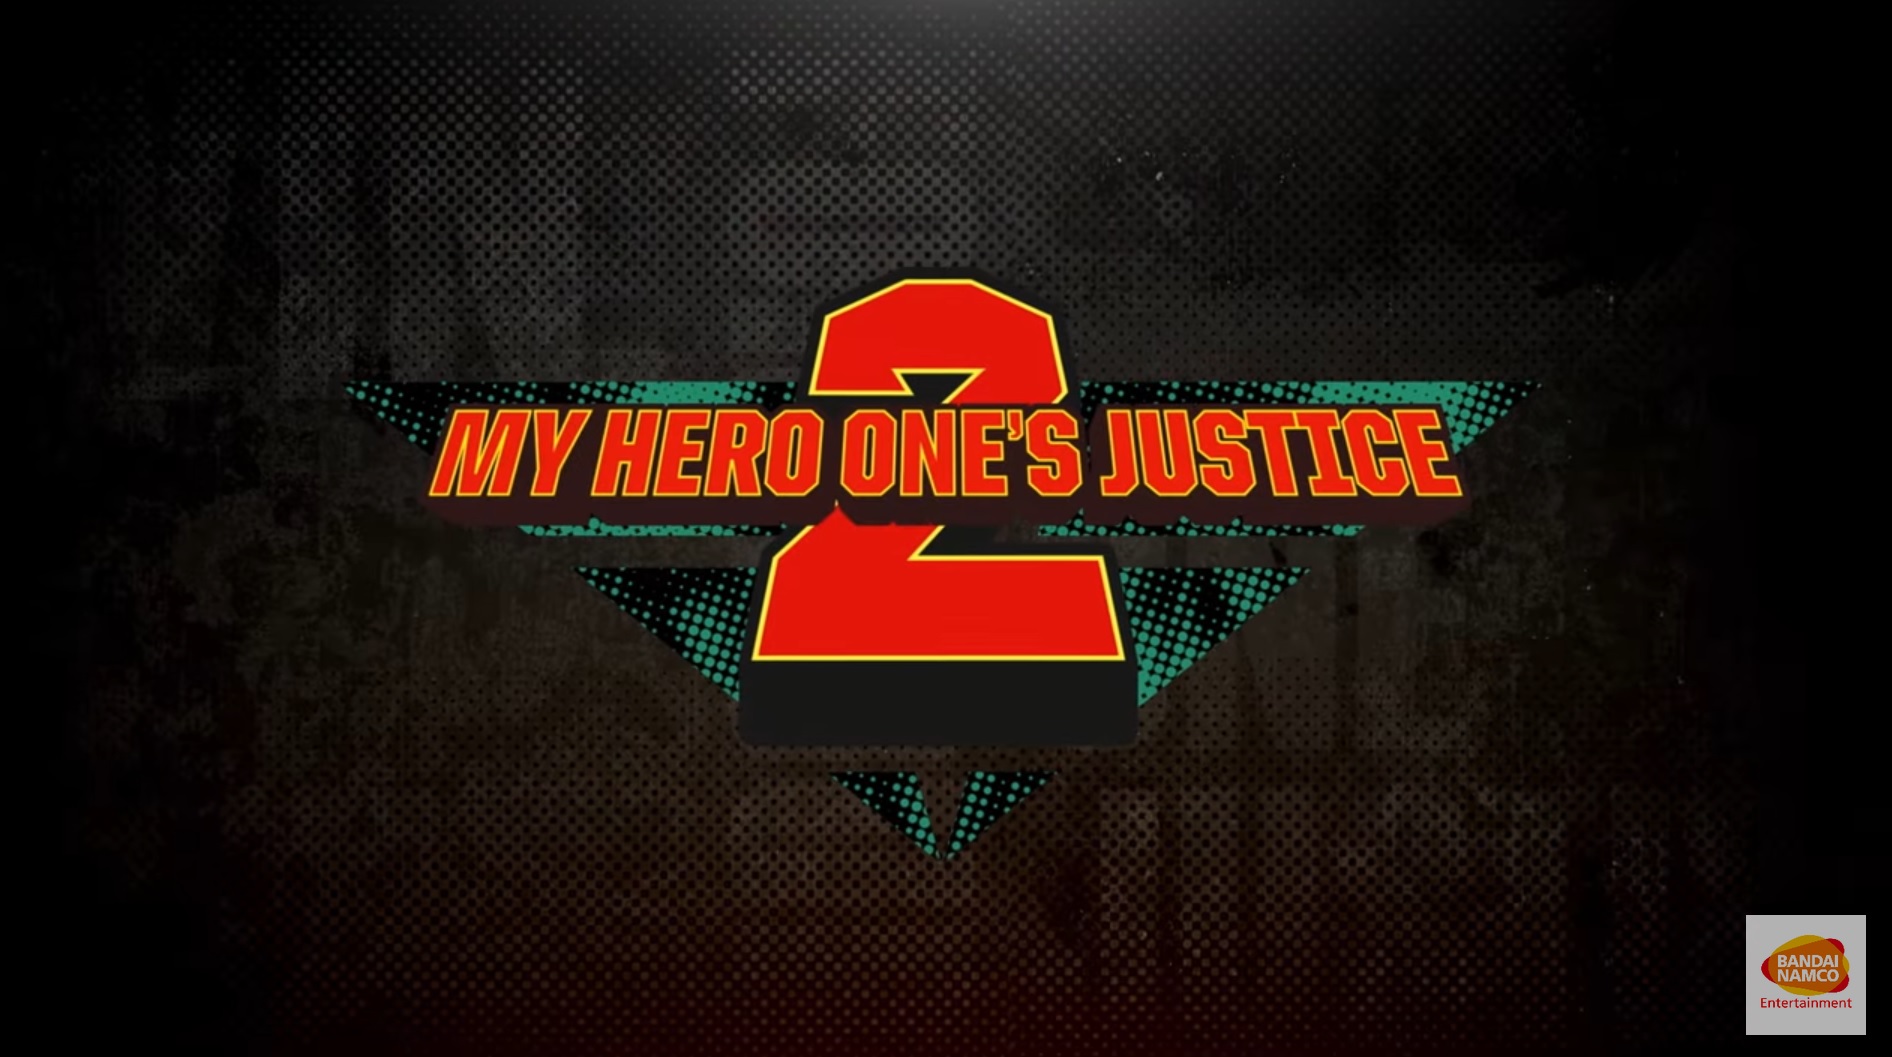 Midnight arriva in MY HERO ONE’S JUSTICE 2